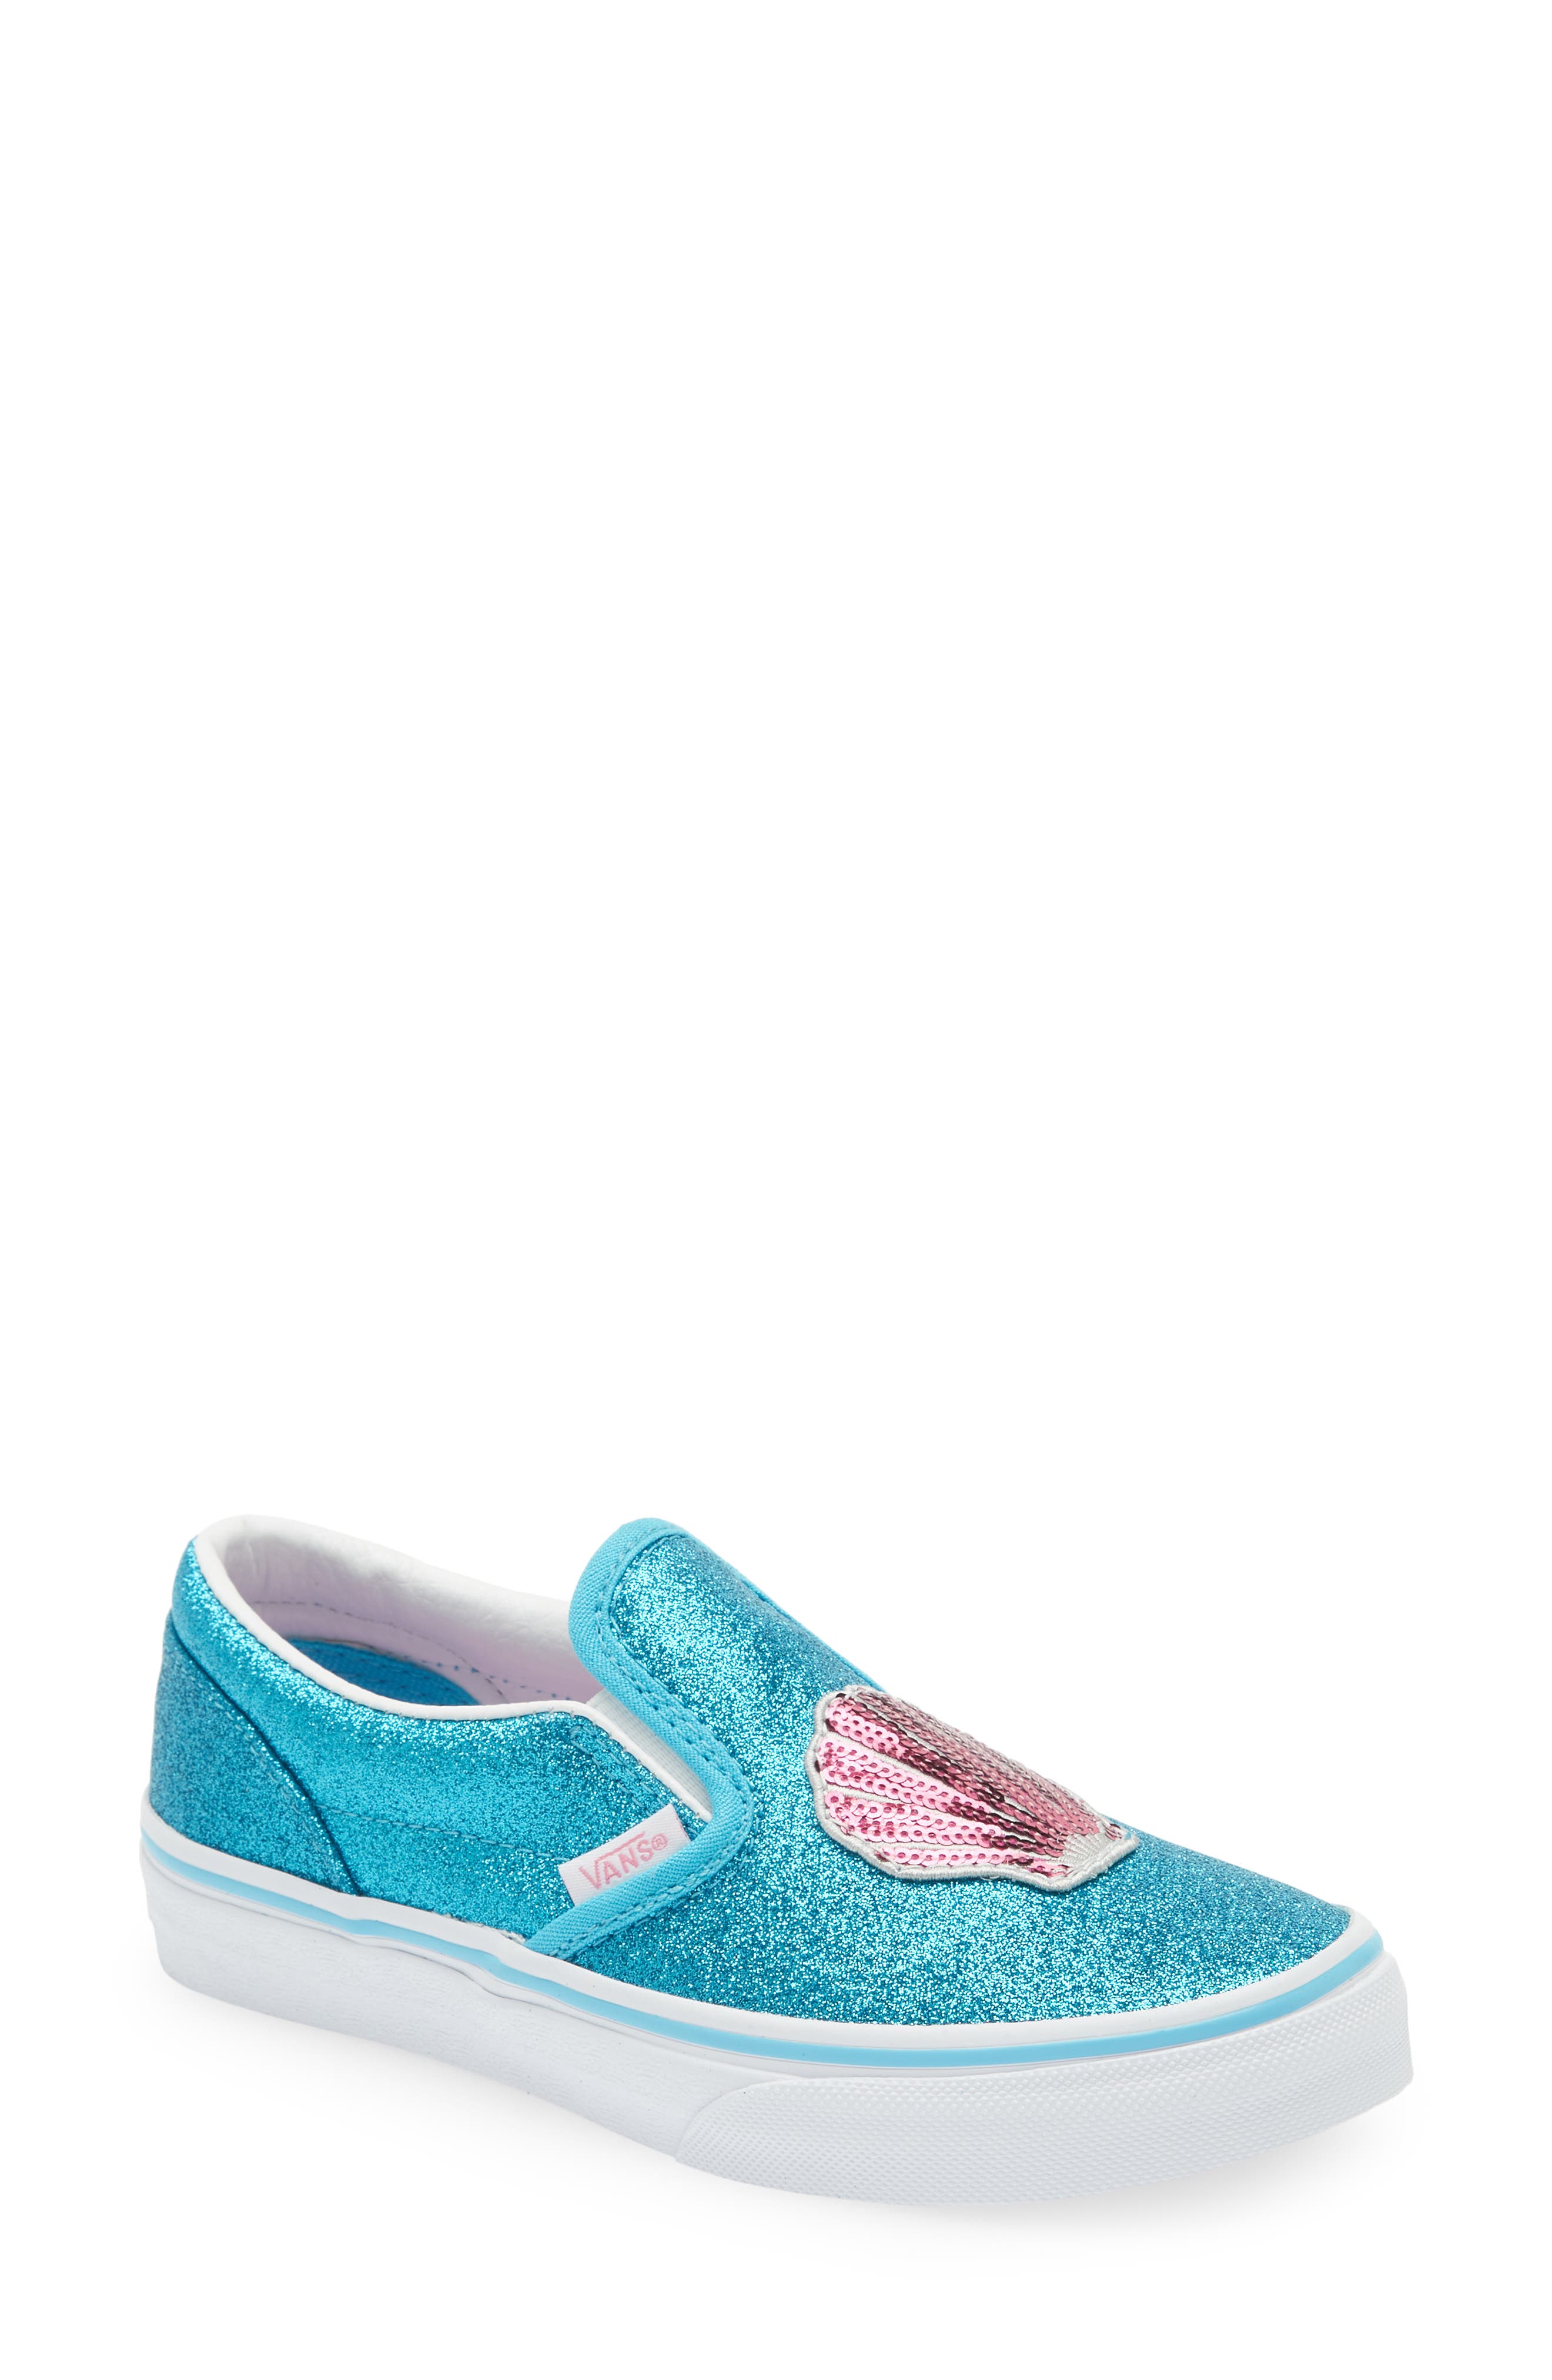 Vans Kids' Classic Slip-On Sneaker in Sequin Patch Shell/Blue Atol